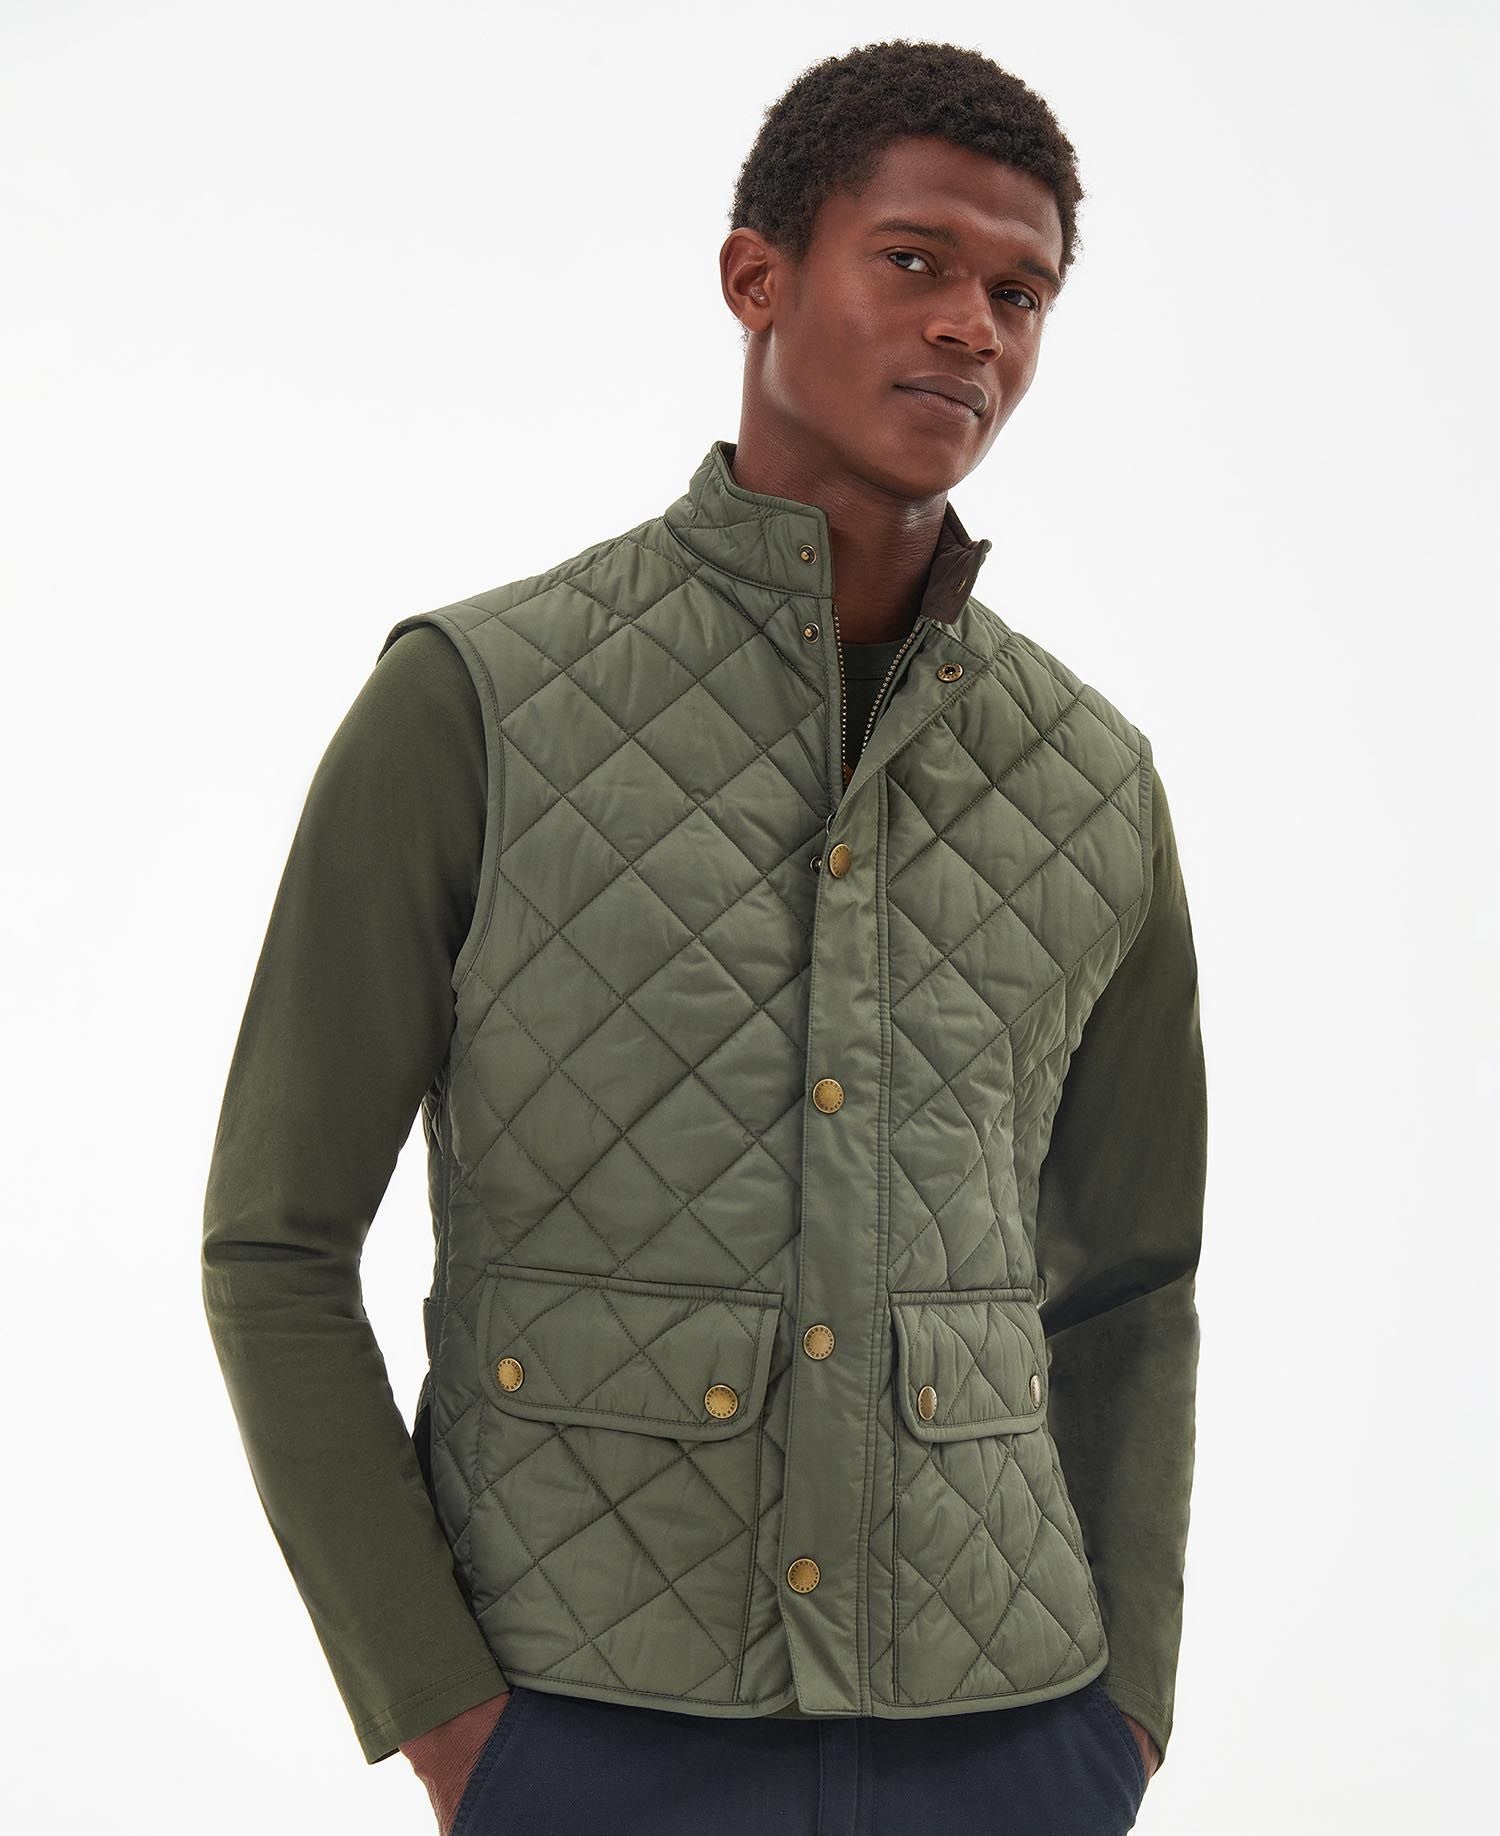 Barbour Lowerdale Quilted Vest in Dusty Olive – The Lucky Knot Men's